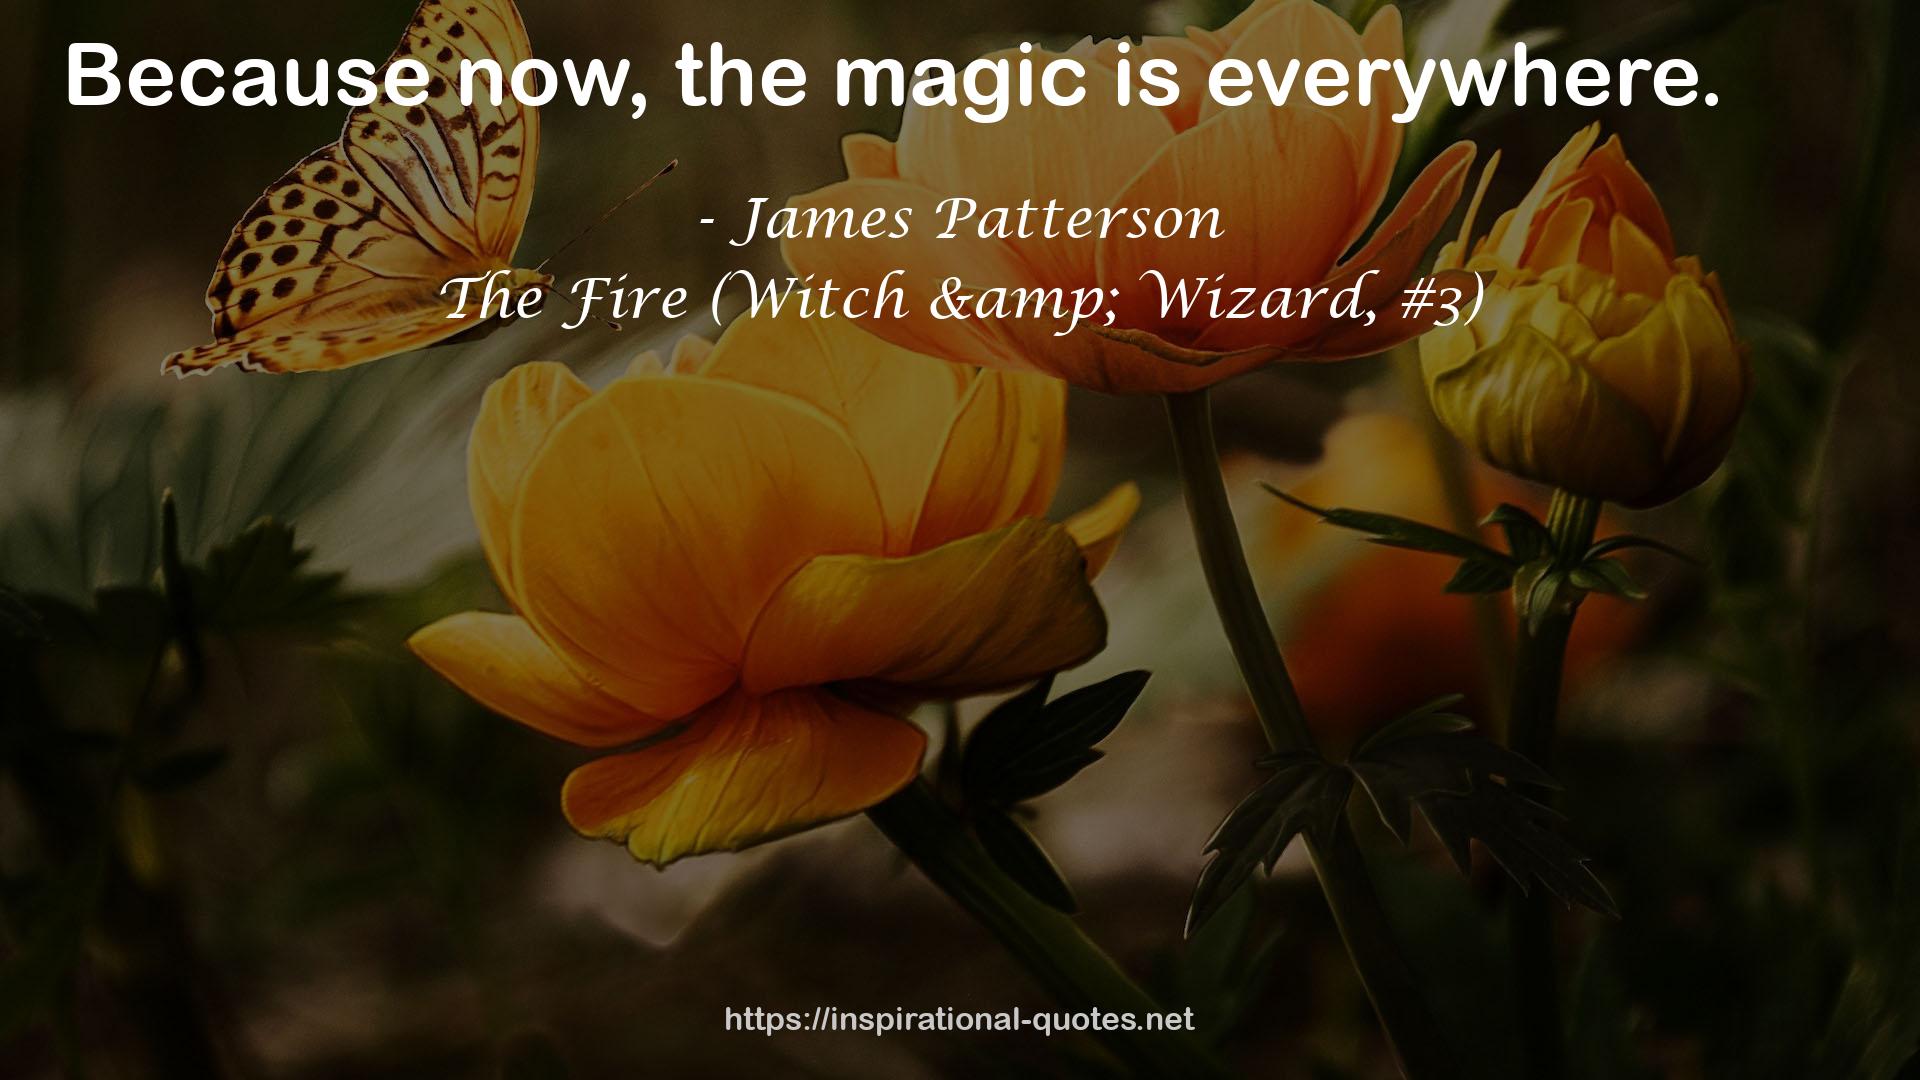 The Fire (Witch & Wizard, #3) QUOTES